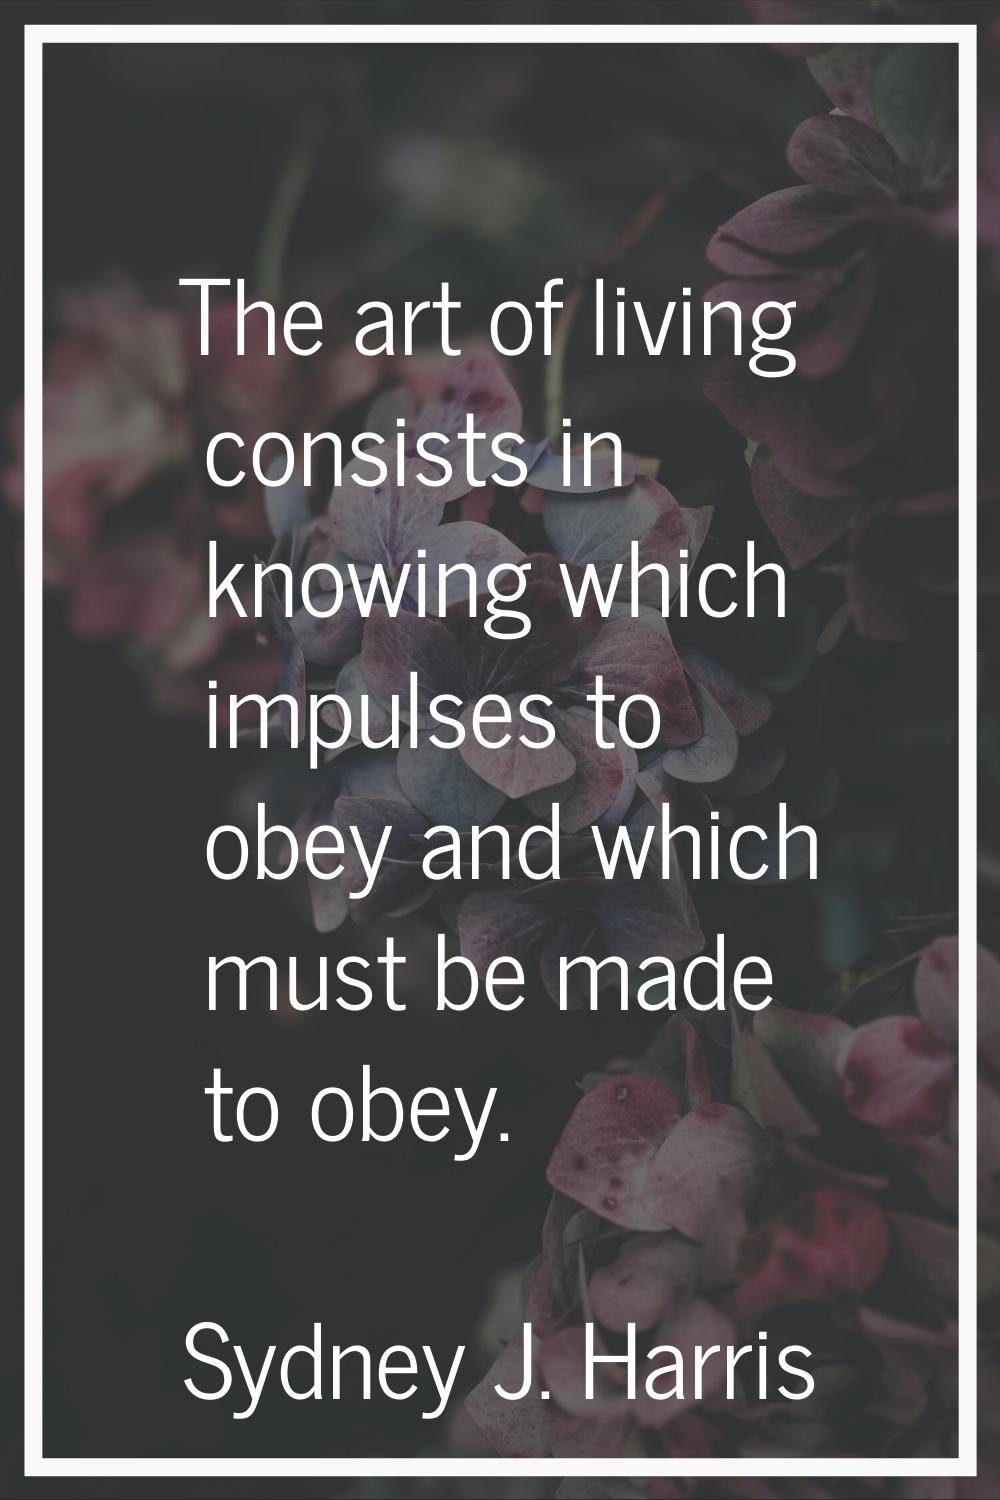 The art of living consists in knowing which impulses to obey and which must be made to obey.